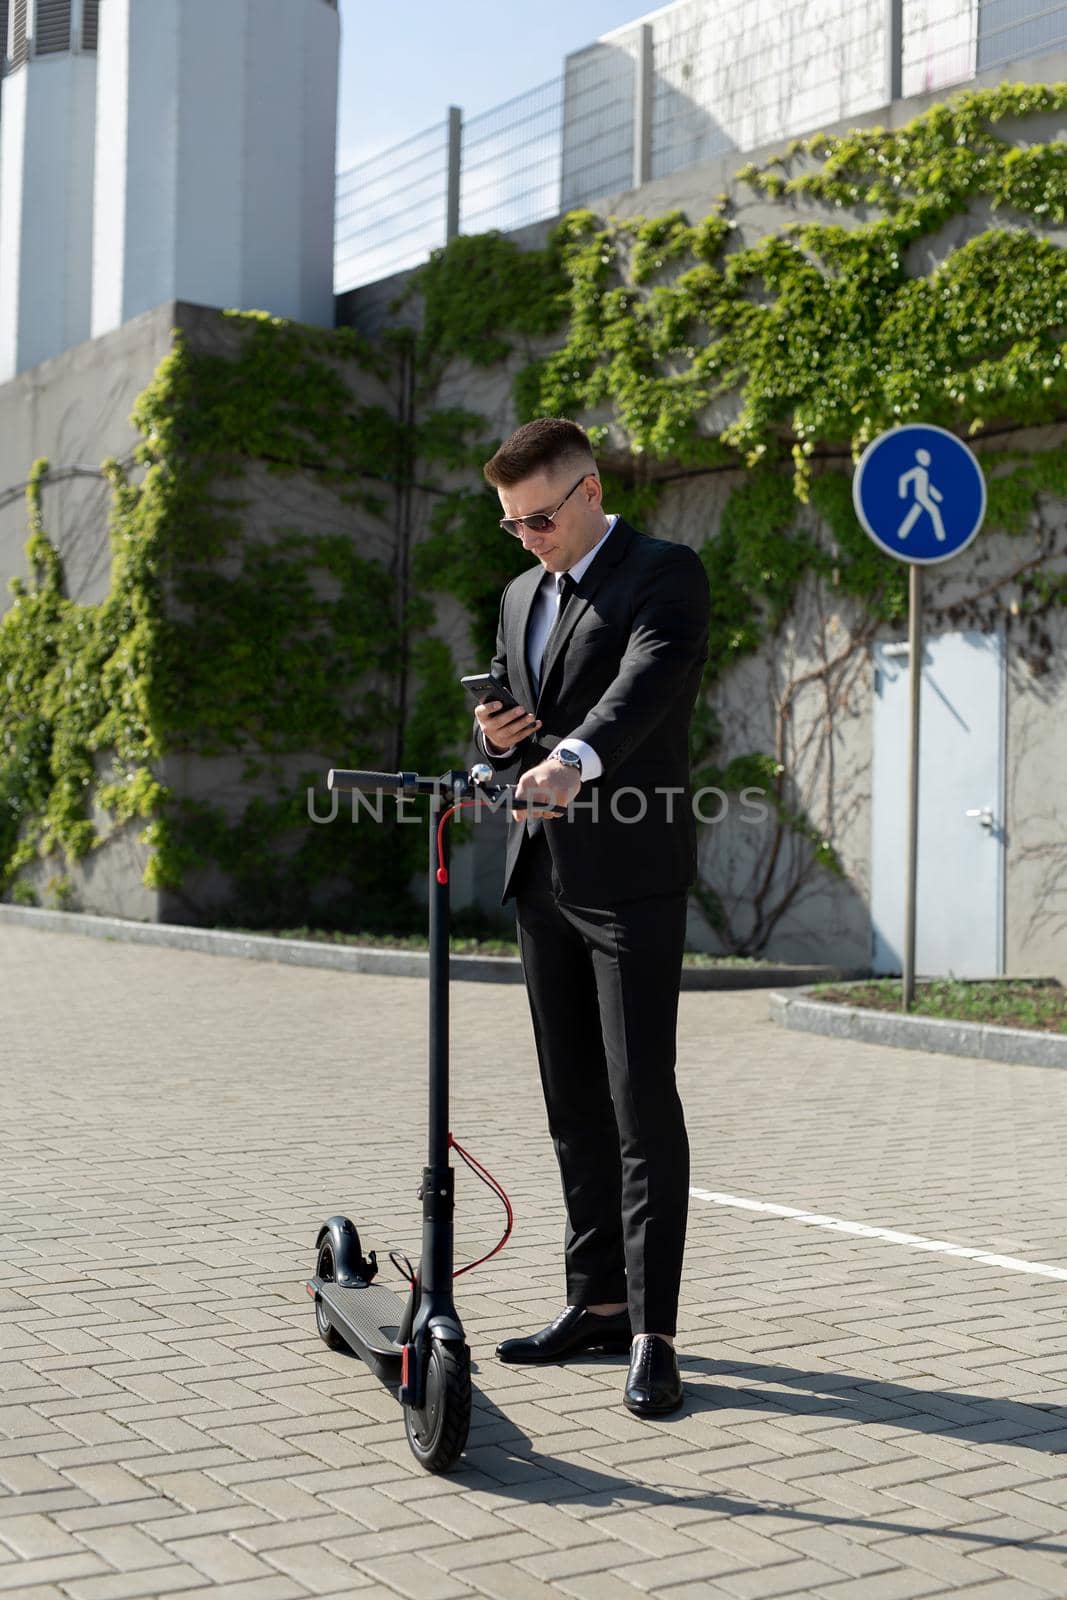 Man in a black business suit stands next to an electric scooter and holds a phone.